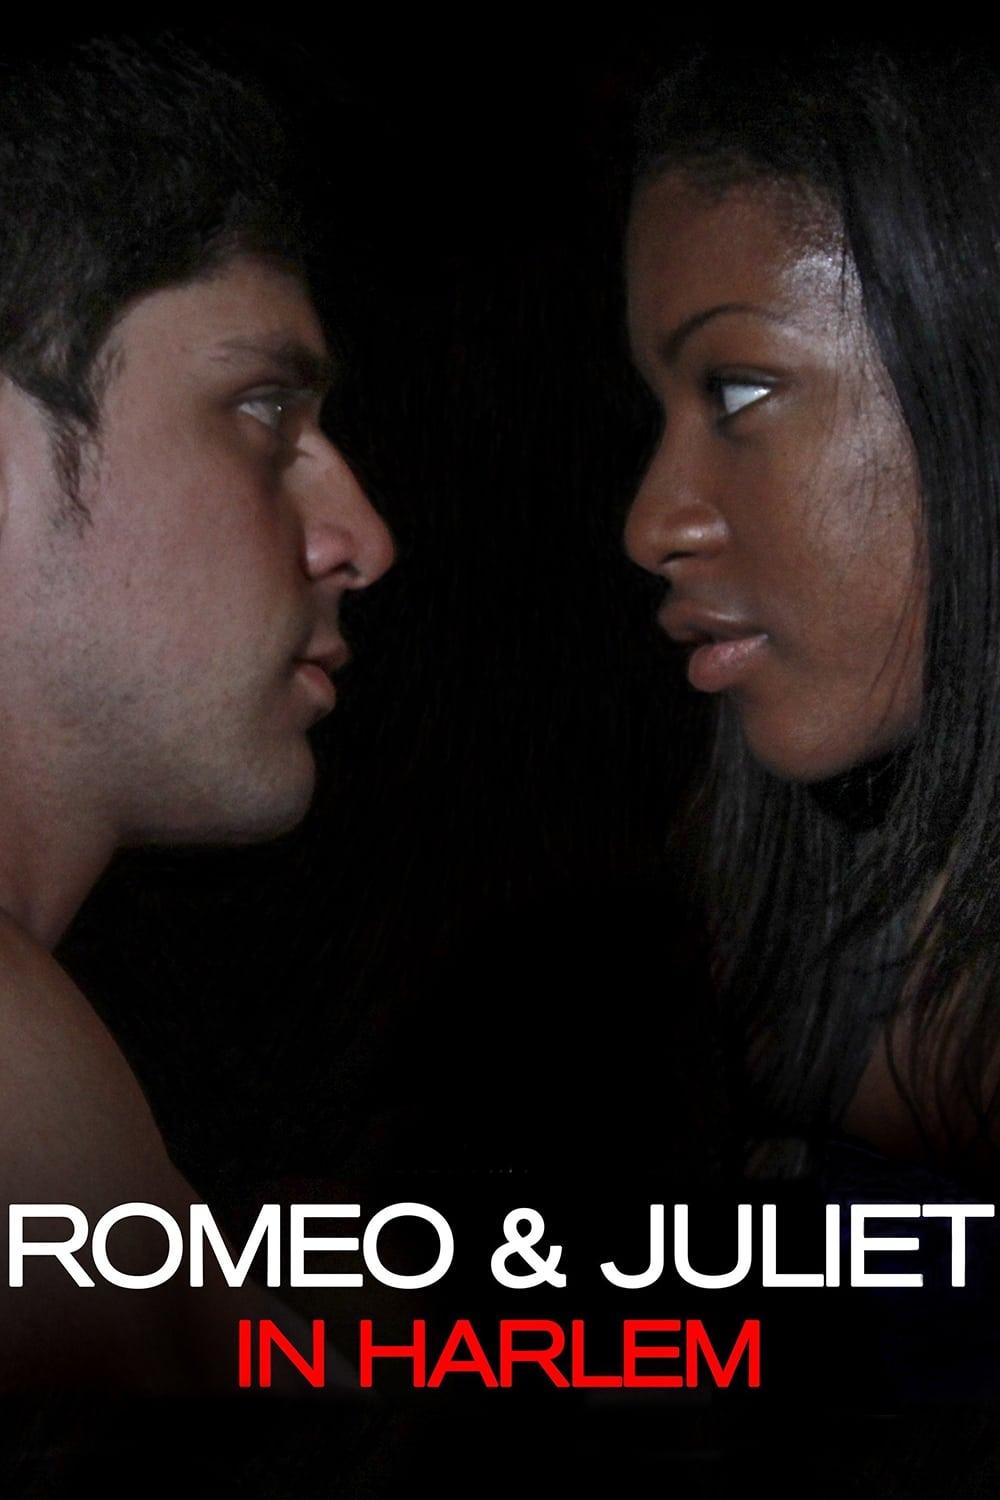 Romeo and Juliet in Harlem poster